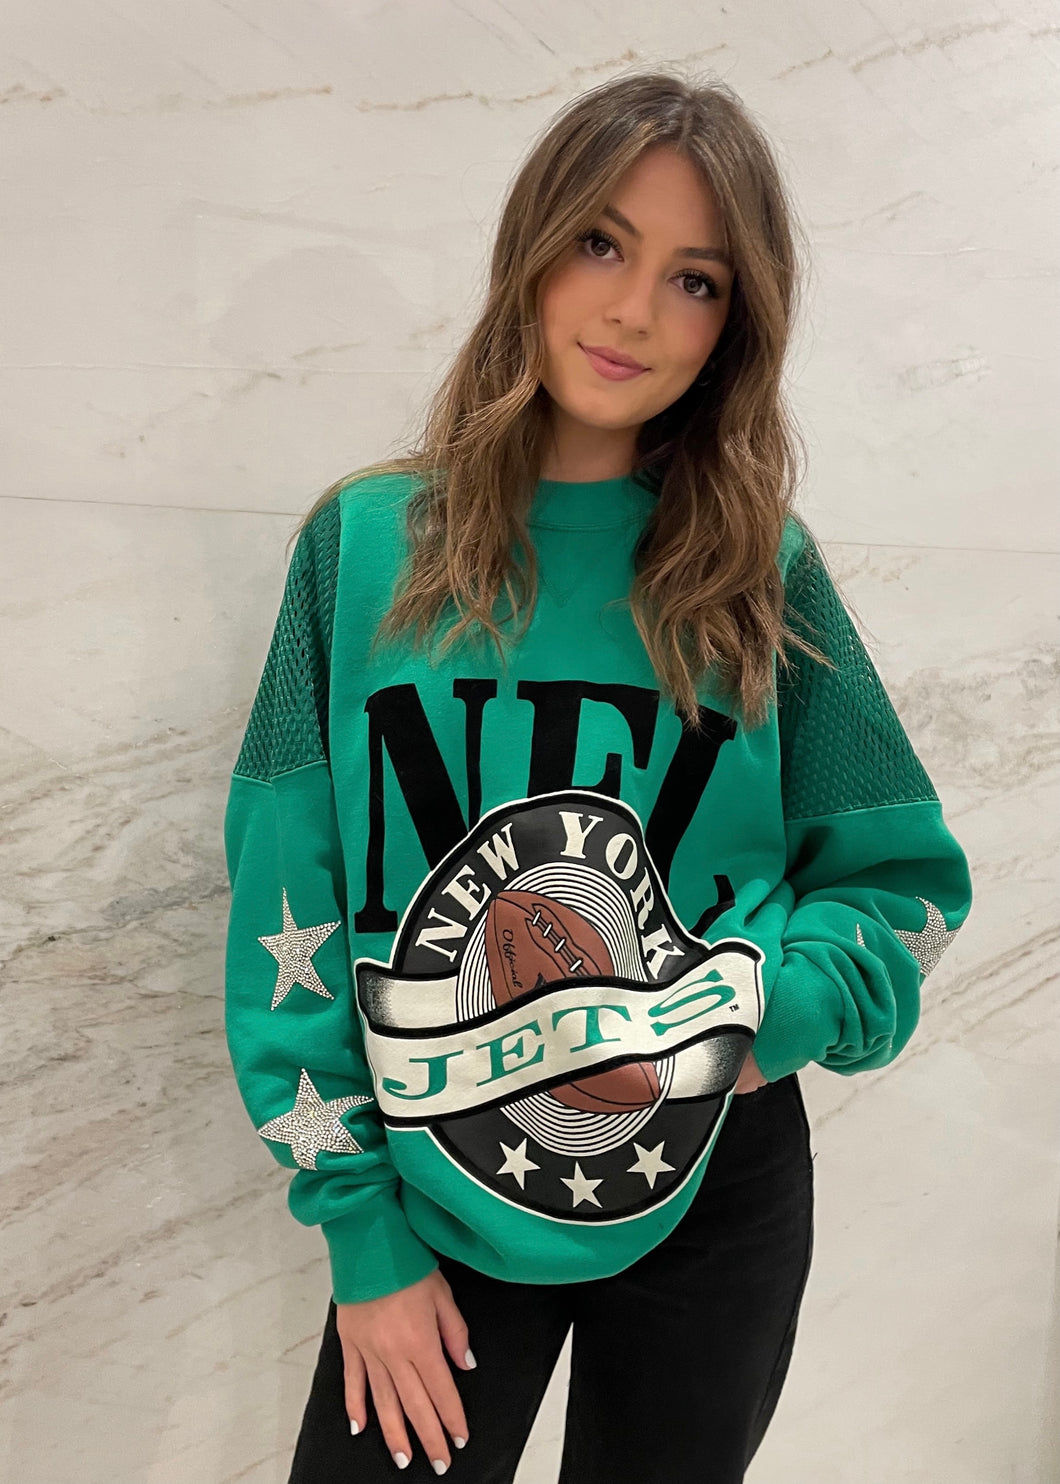 NY Jets, Rare NFL One of a KIND Vintage Sweatshirt with Crystal Star Design